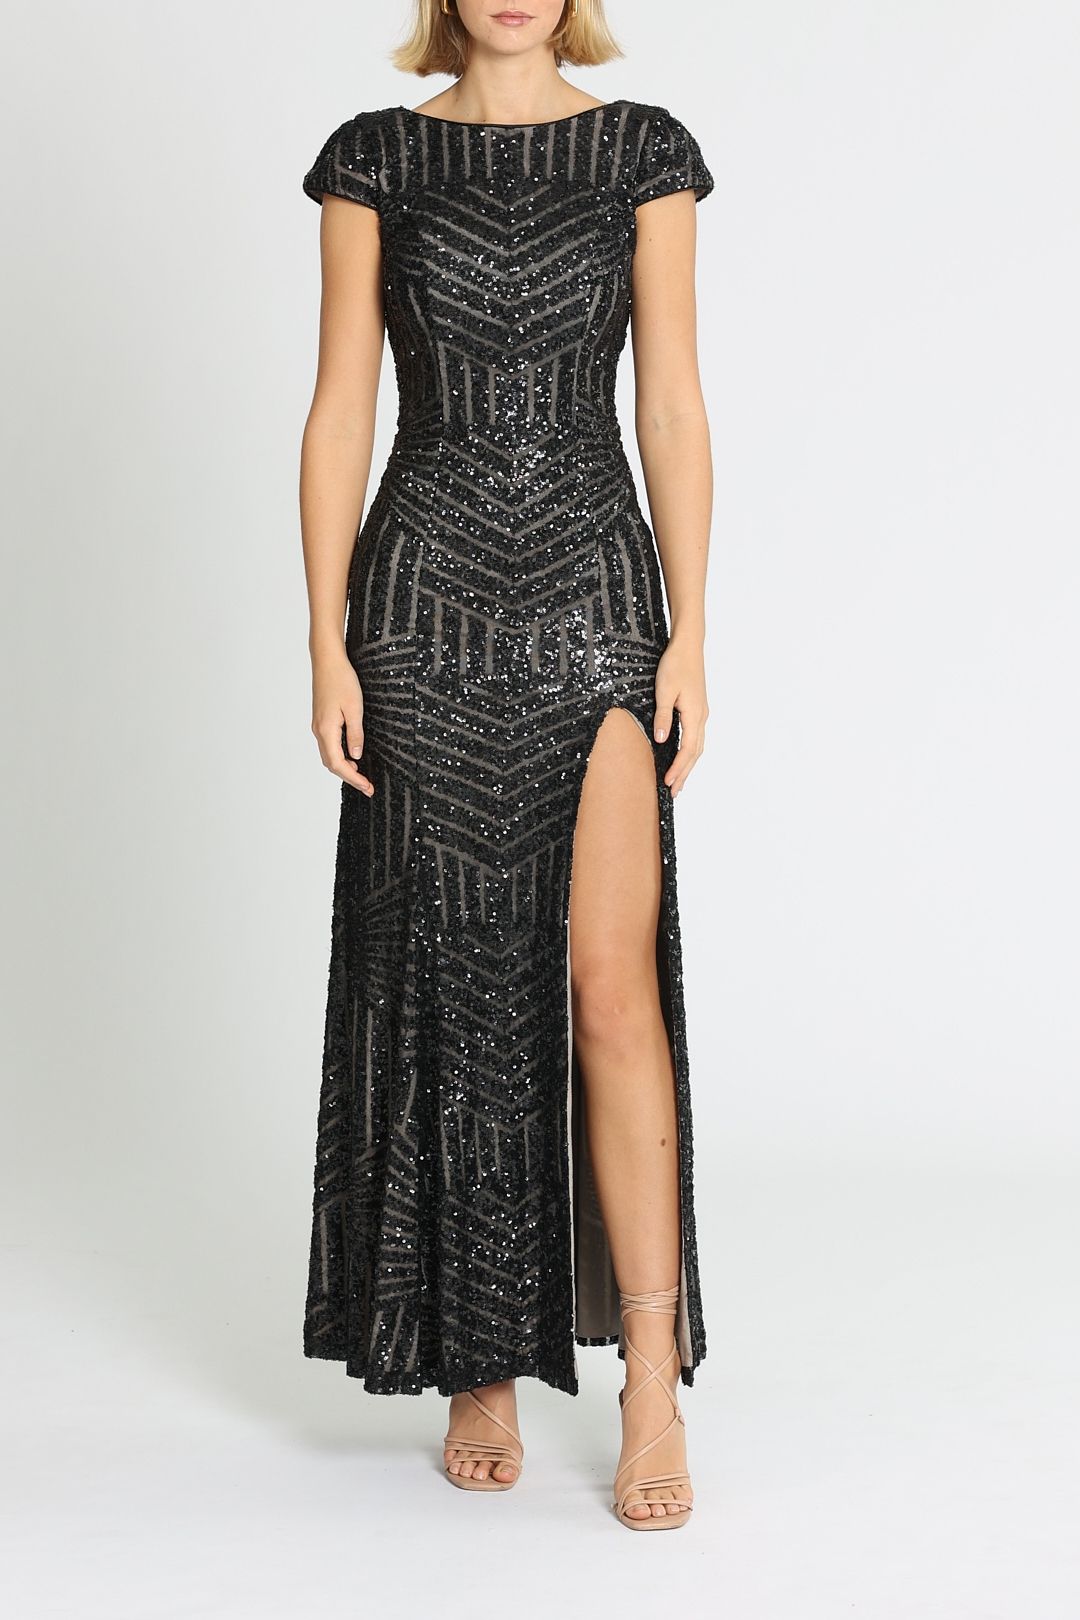 Sequin Cowl Back Gown in Black by Badgley Mischka for Hire